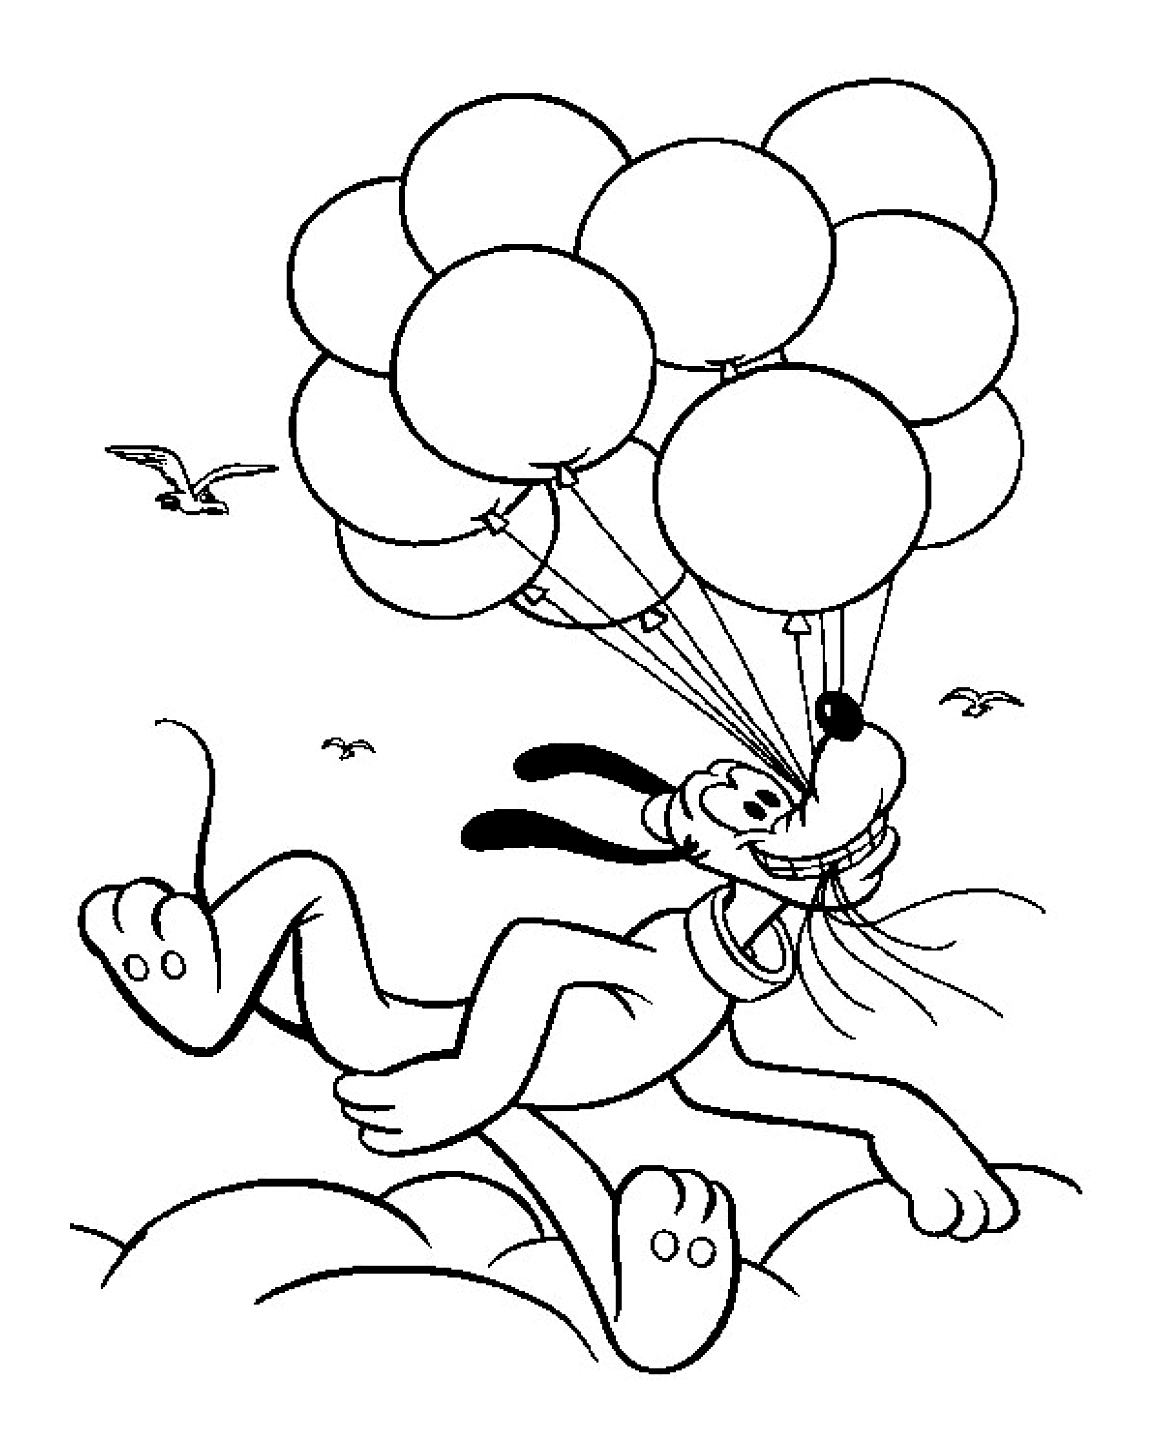 Pluto Coloring Pages Pluto For Children Pluto Kids Coloring Pages